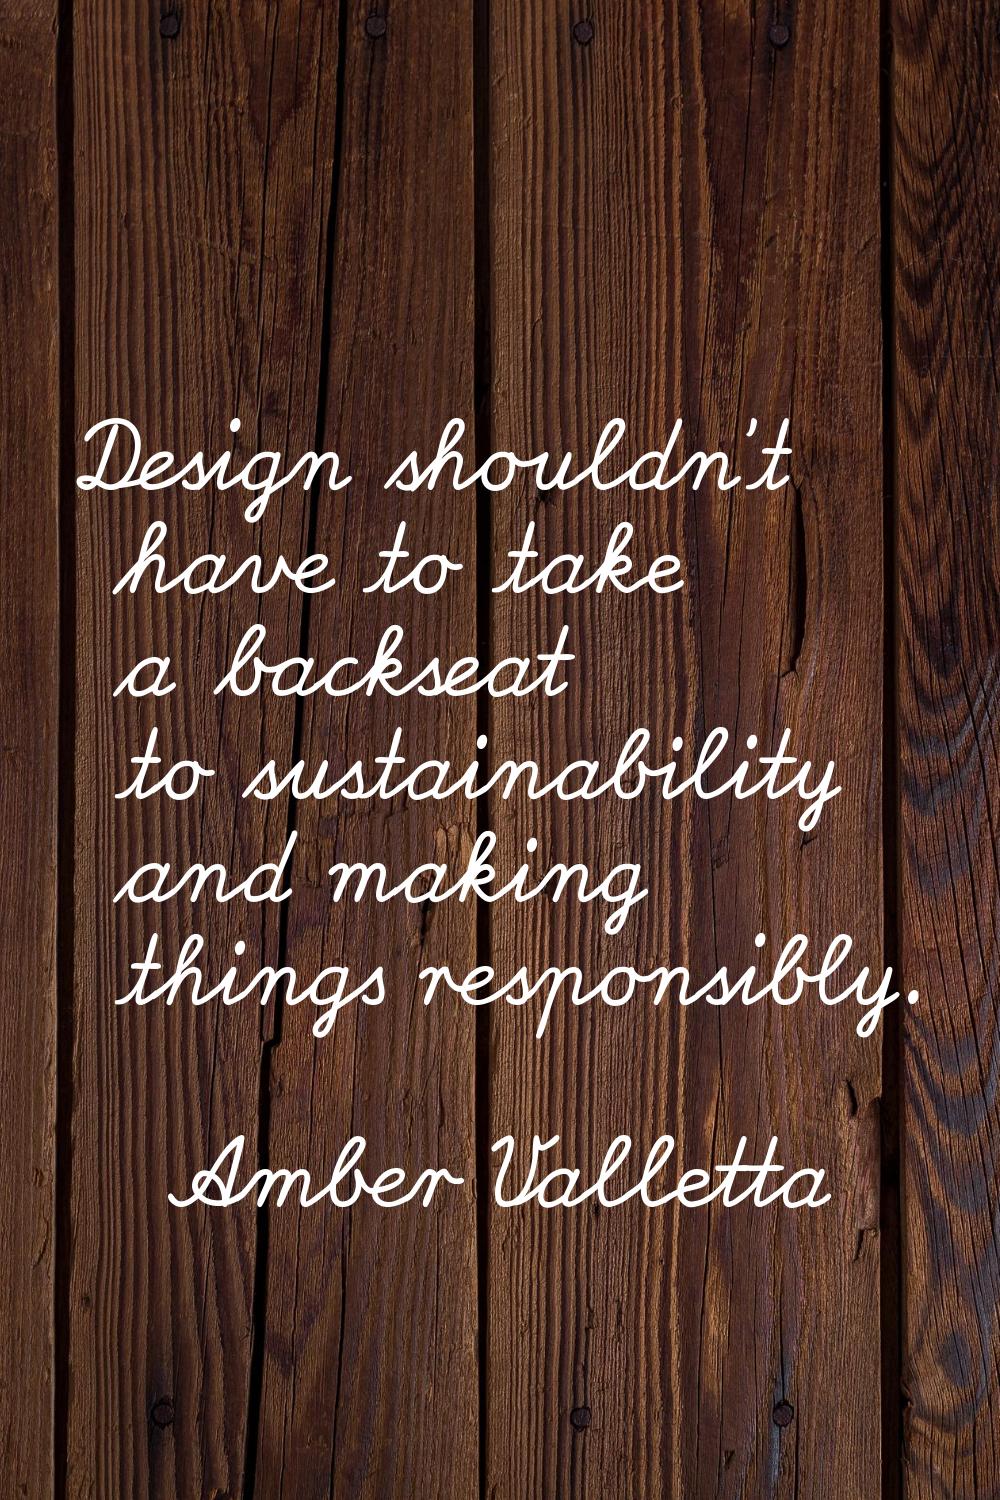 Design shouldn't have to take a backseat to sustainability and making things responsibly.